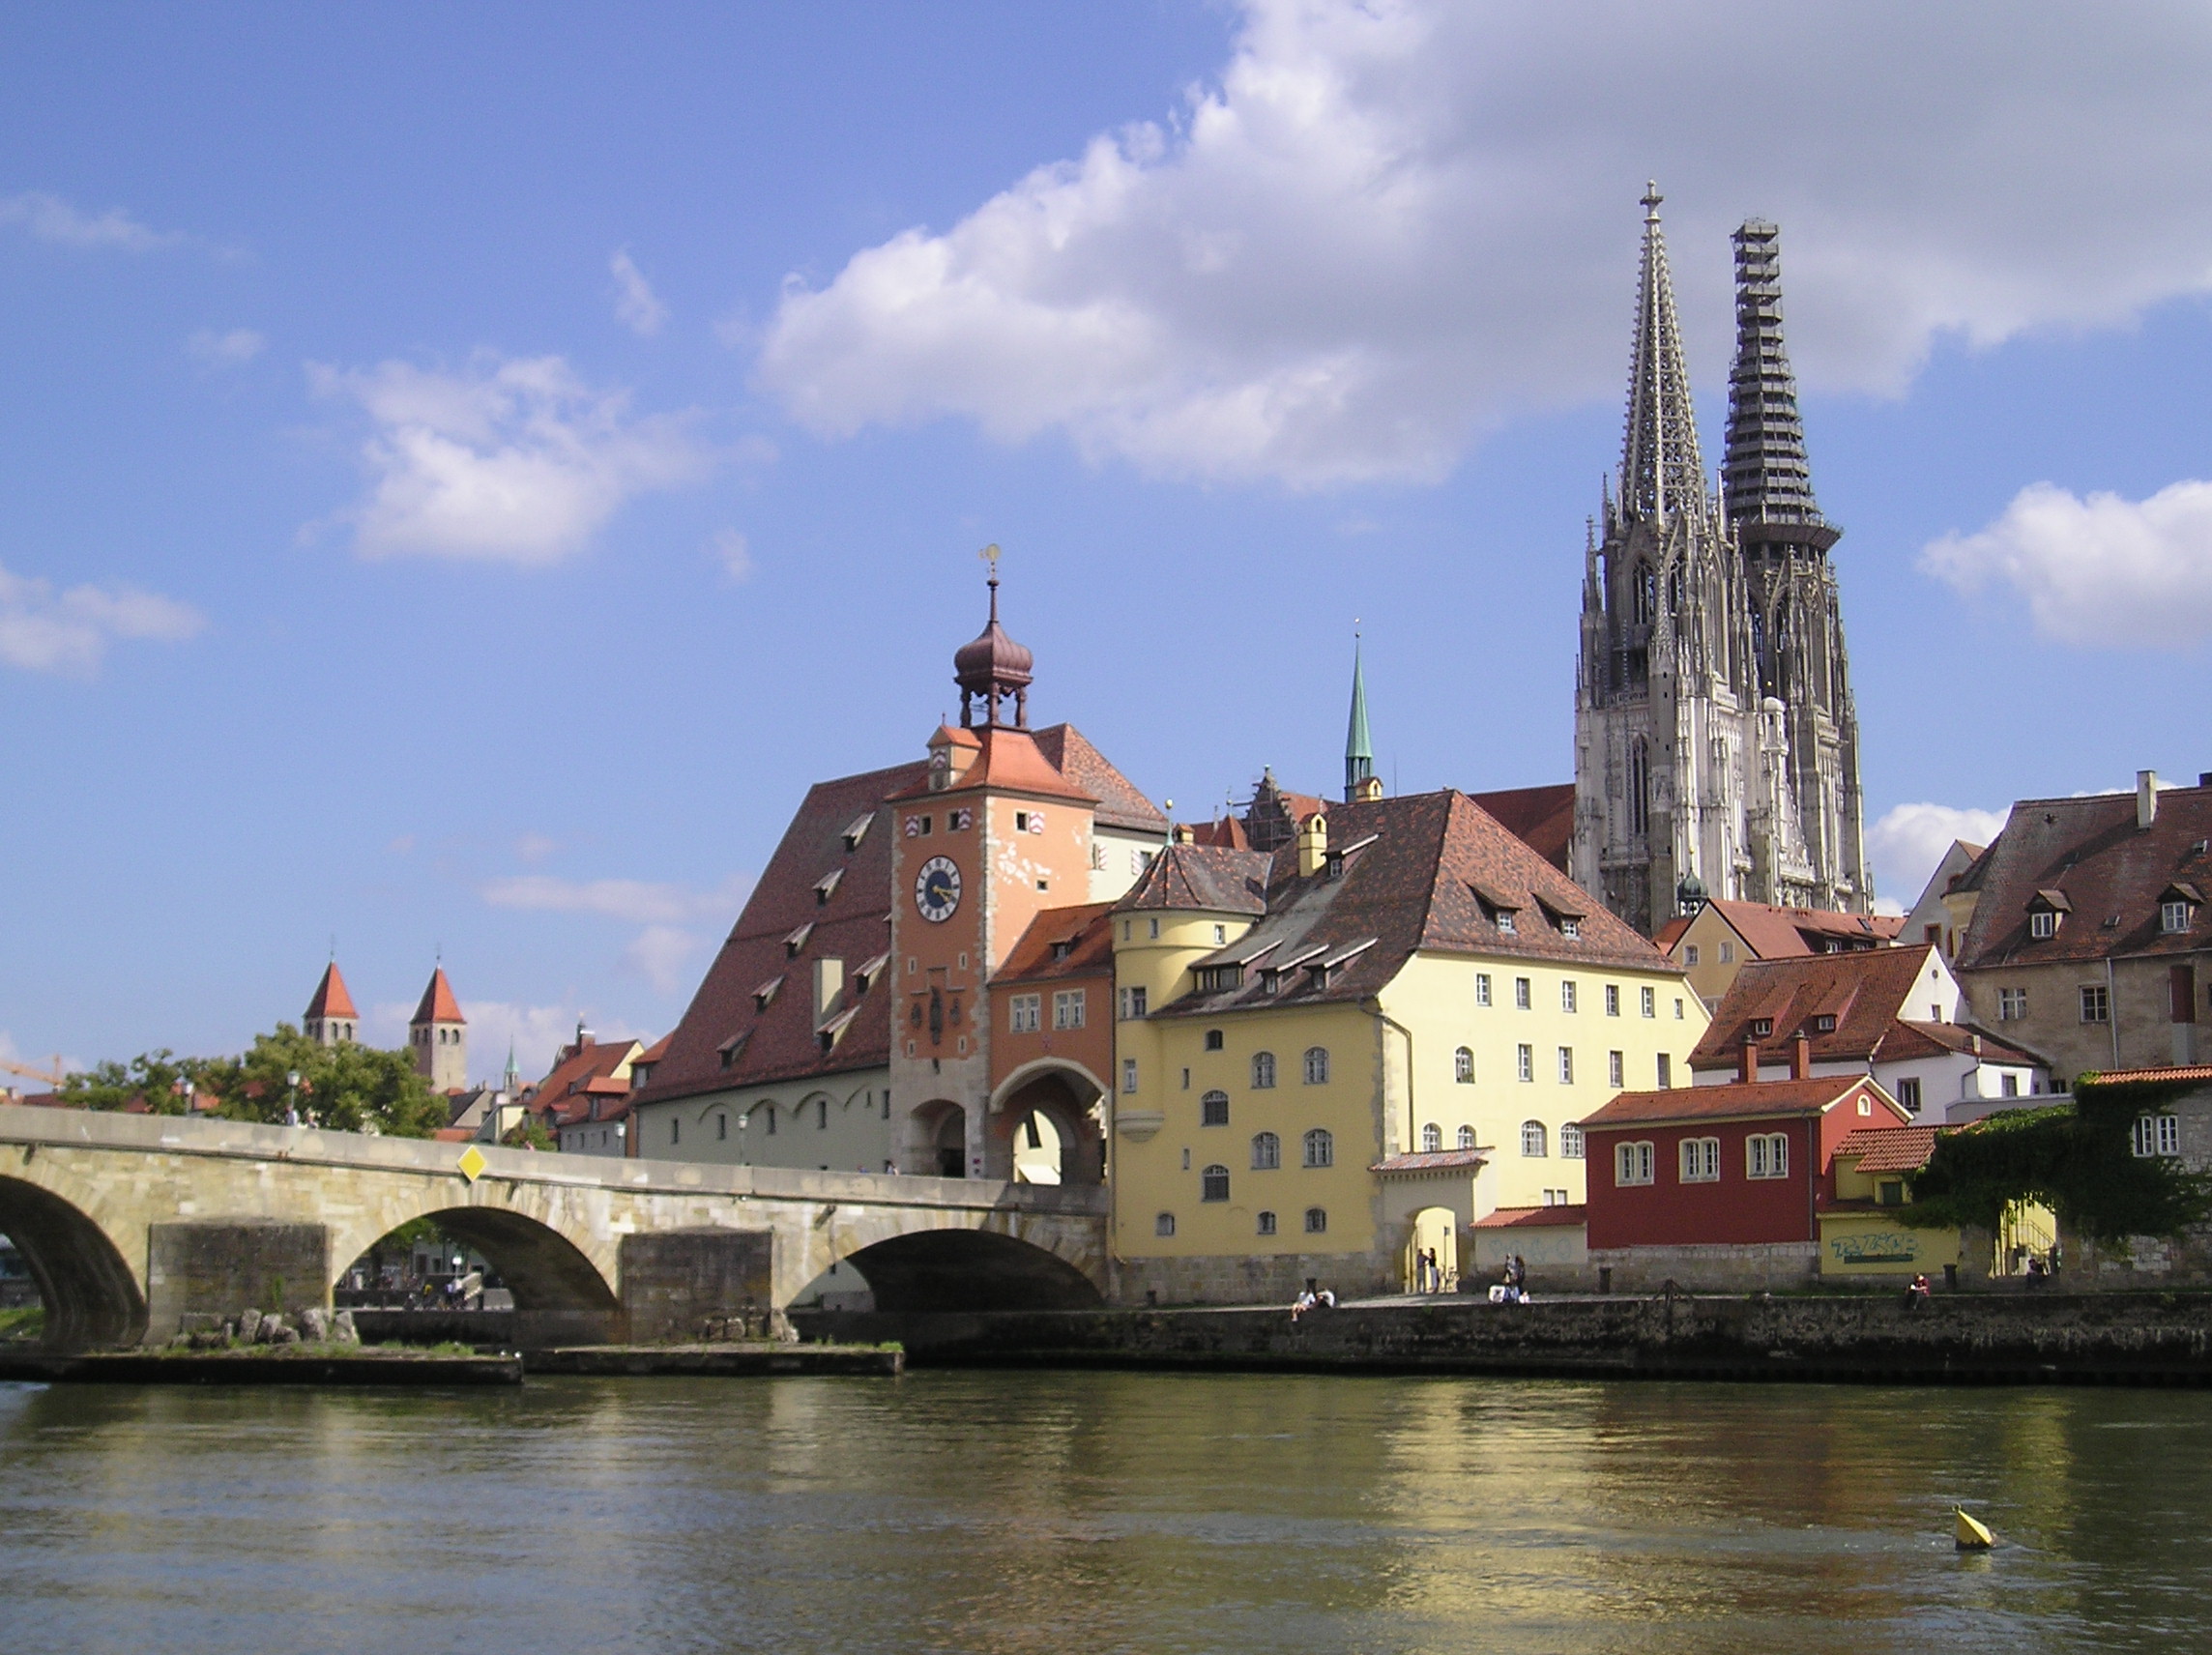 "Stadtansicht Regensburg" by HH58 - Own work. Licensed under CC BY-SA 3.0 via Wikimedia Commons - https://commons.wikimedia.org/wiki/File:Stadtansicht_Regensburg.JPG#/media/File:Stadtansicht_Regensburg.JPG